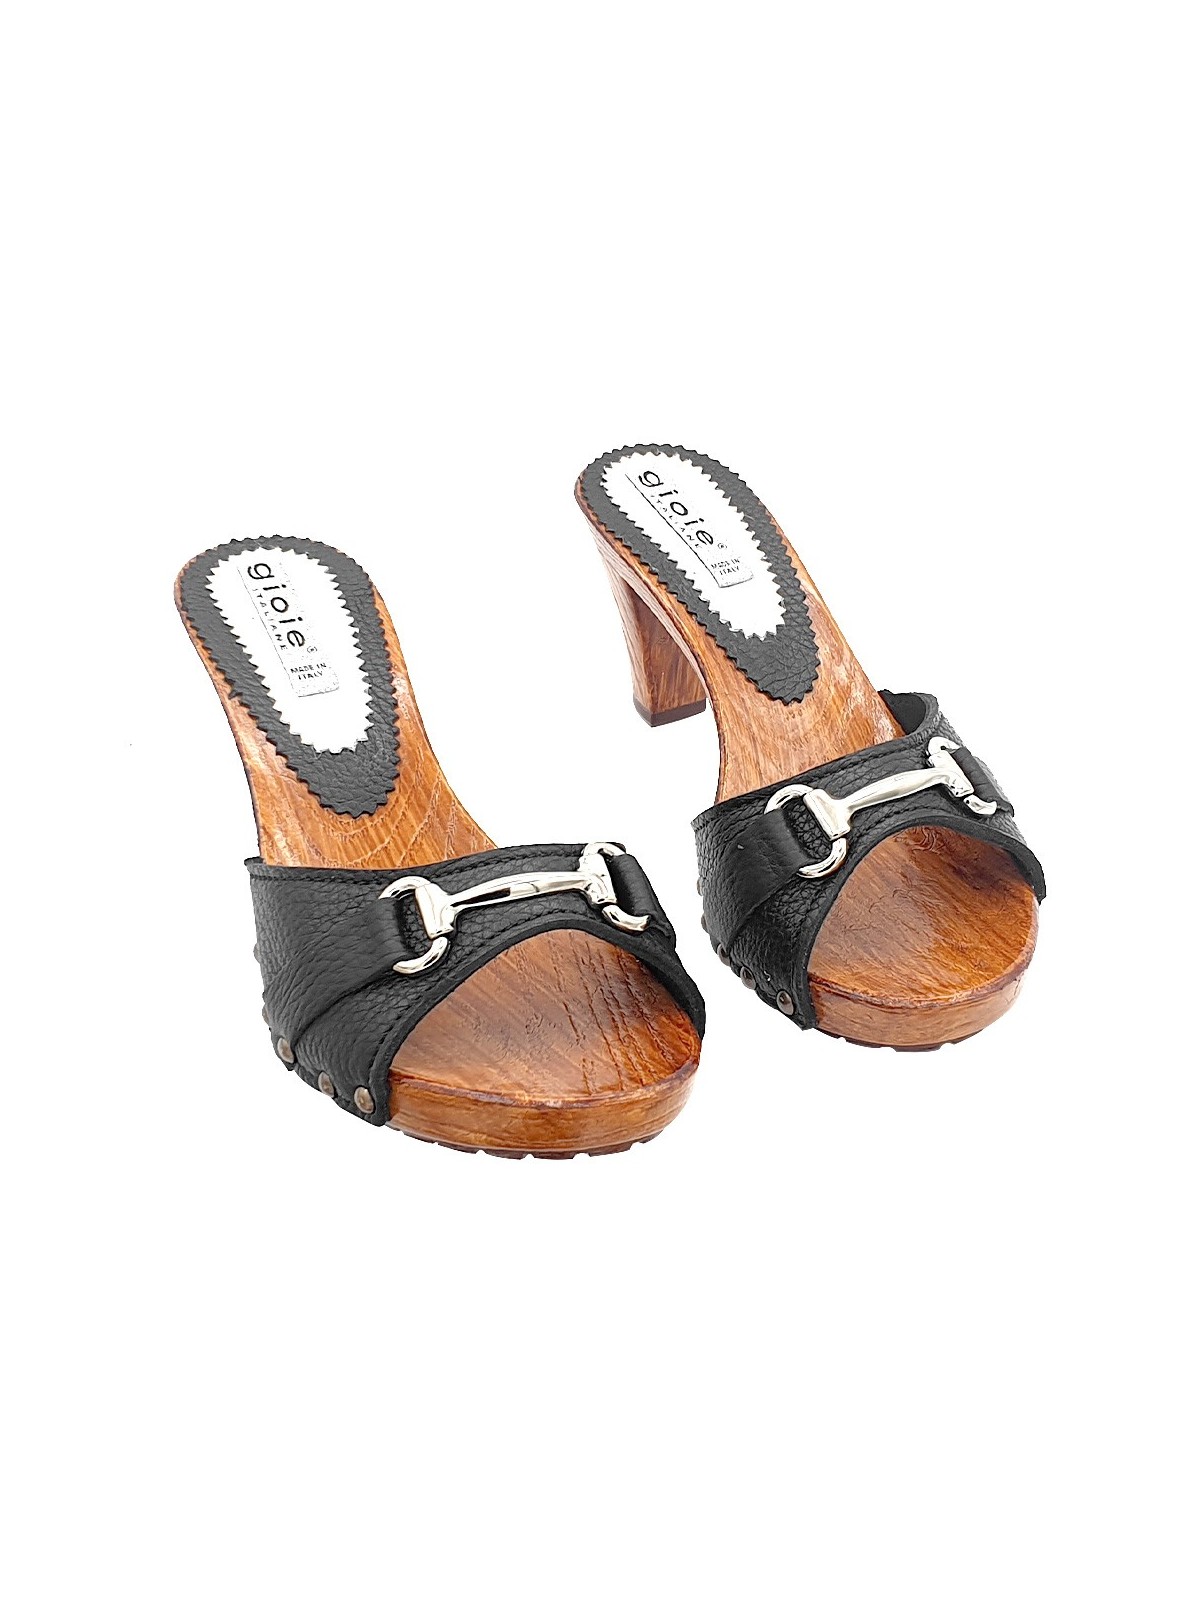 BLACK CLOGS WITH SILVER ACCESSORY